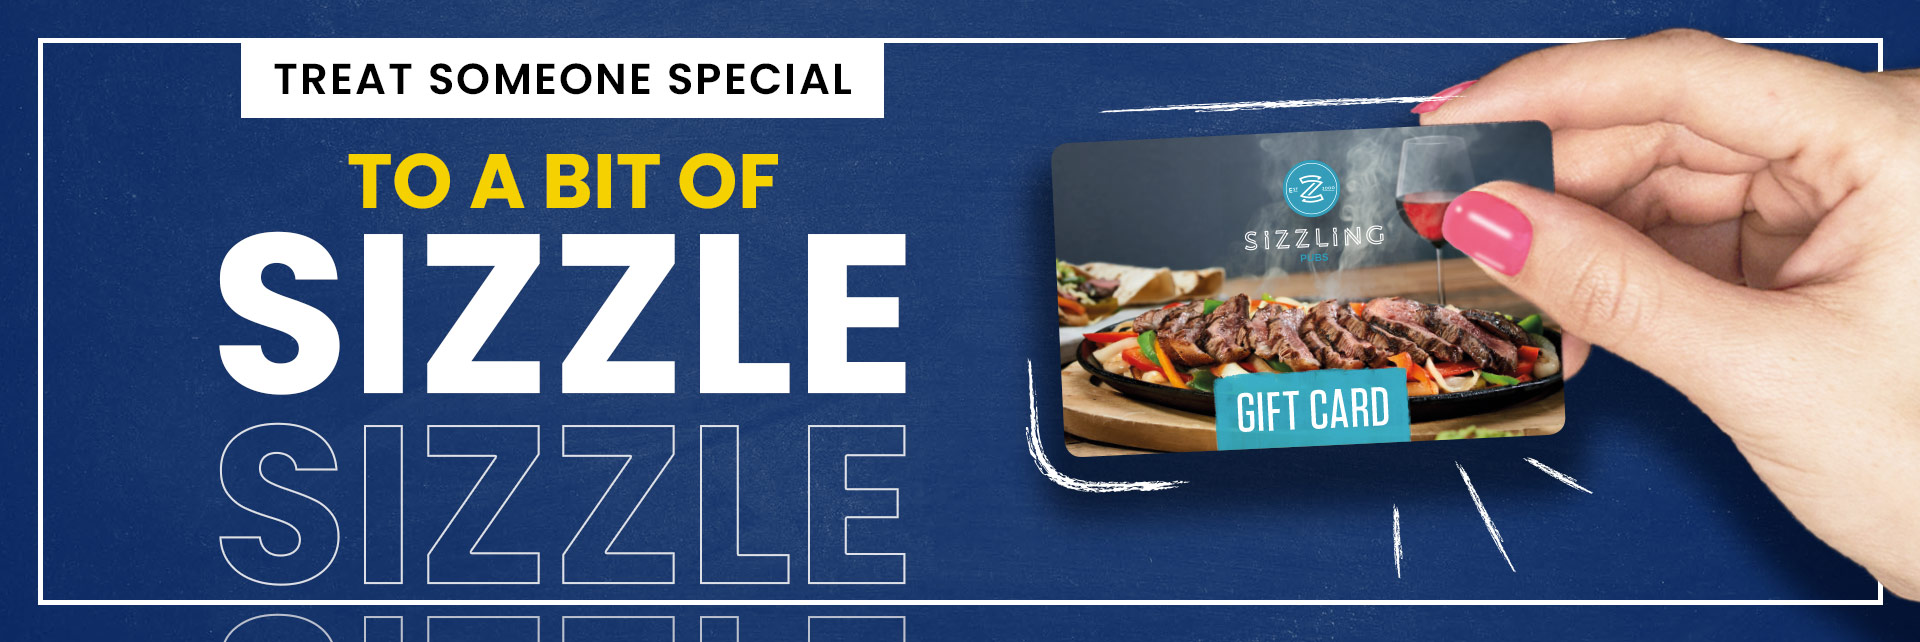 Sizzling Pubs Gift Card at The Eastfield Arms in Barnsley